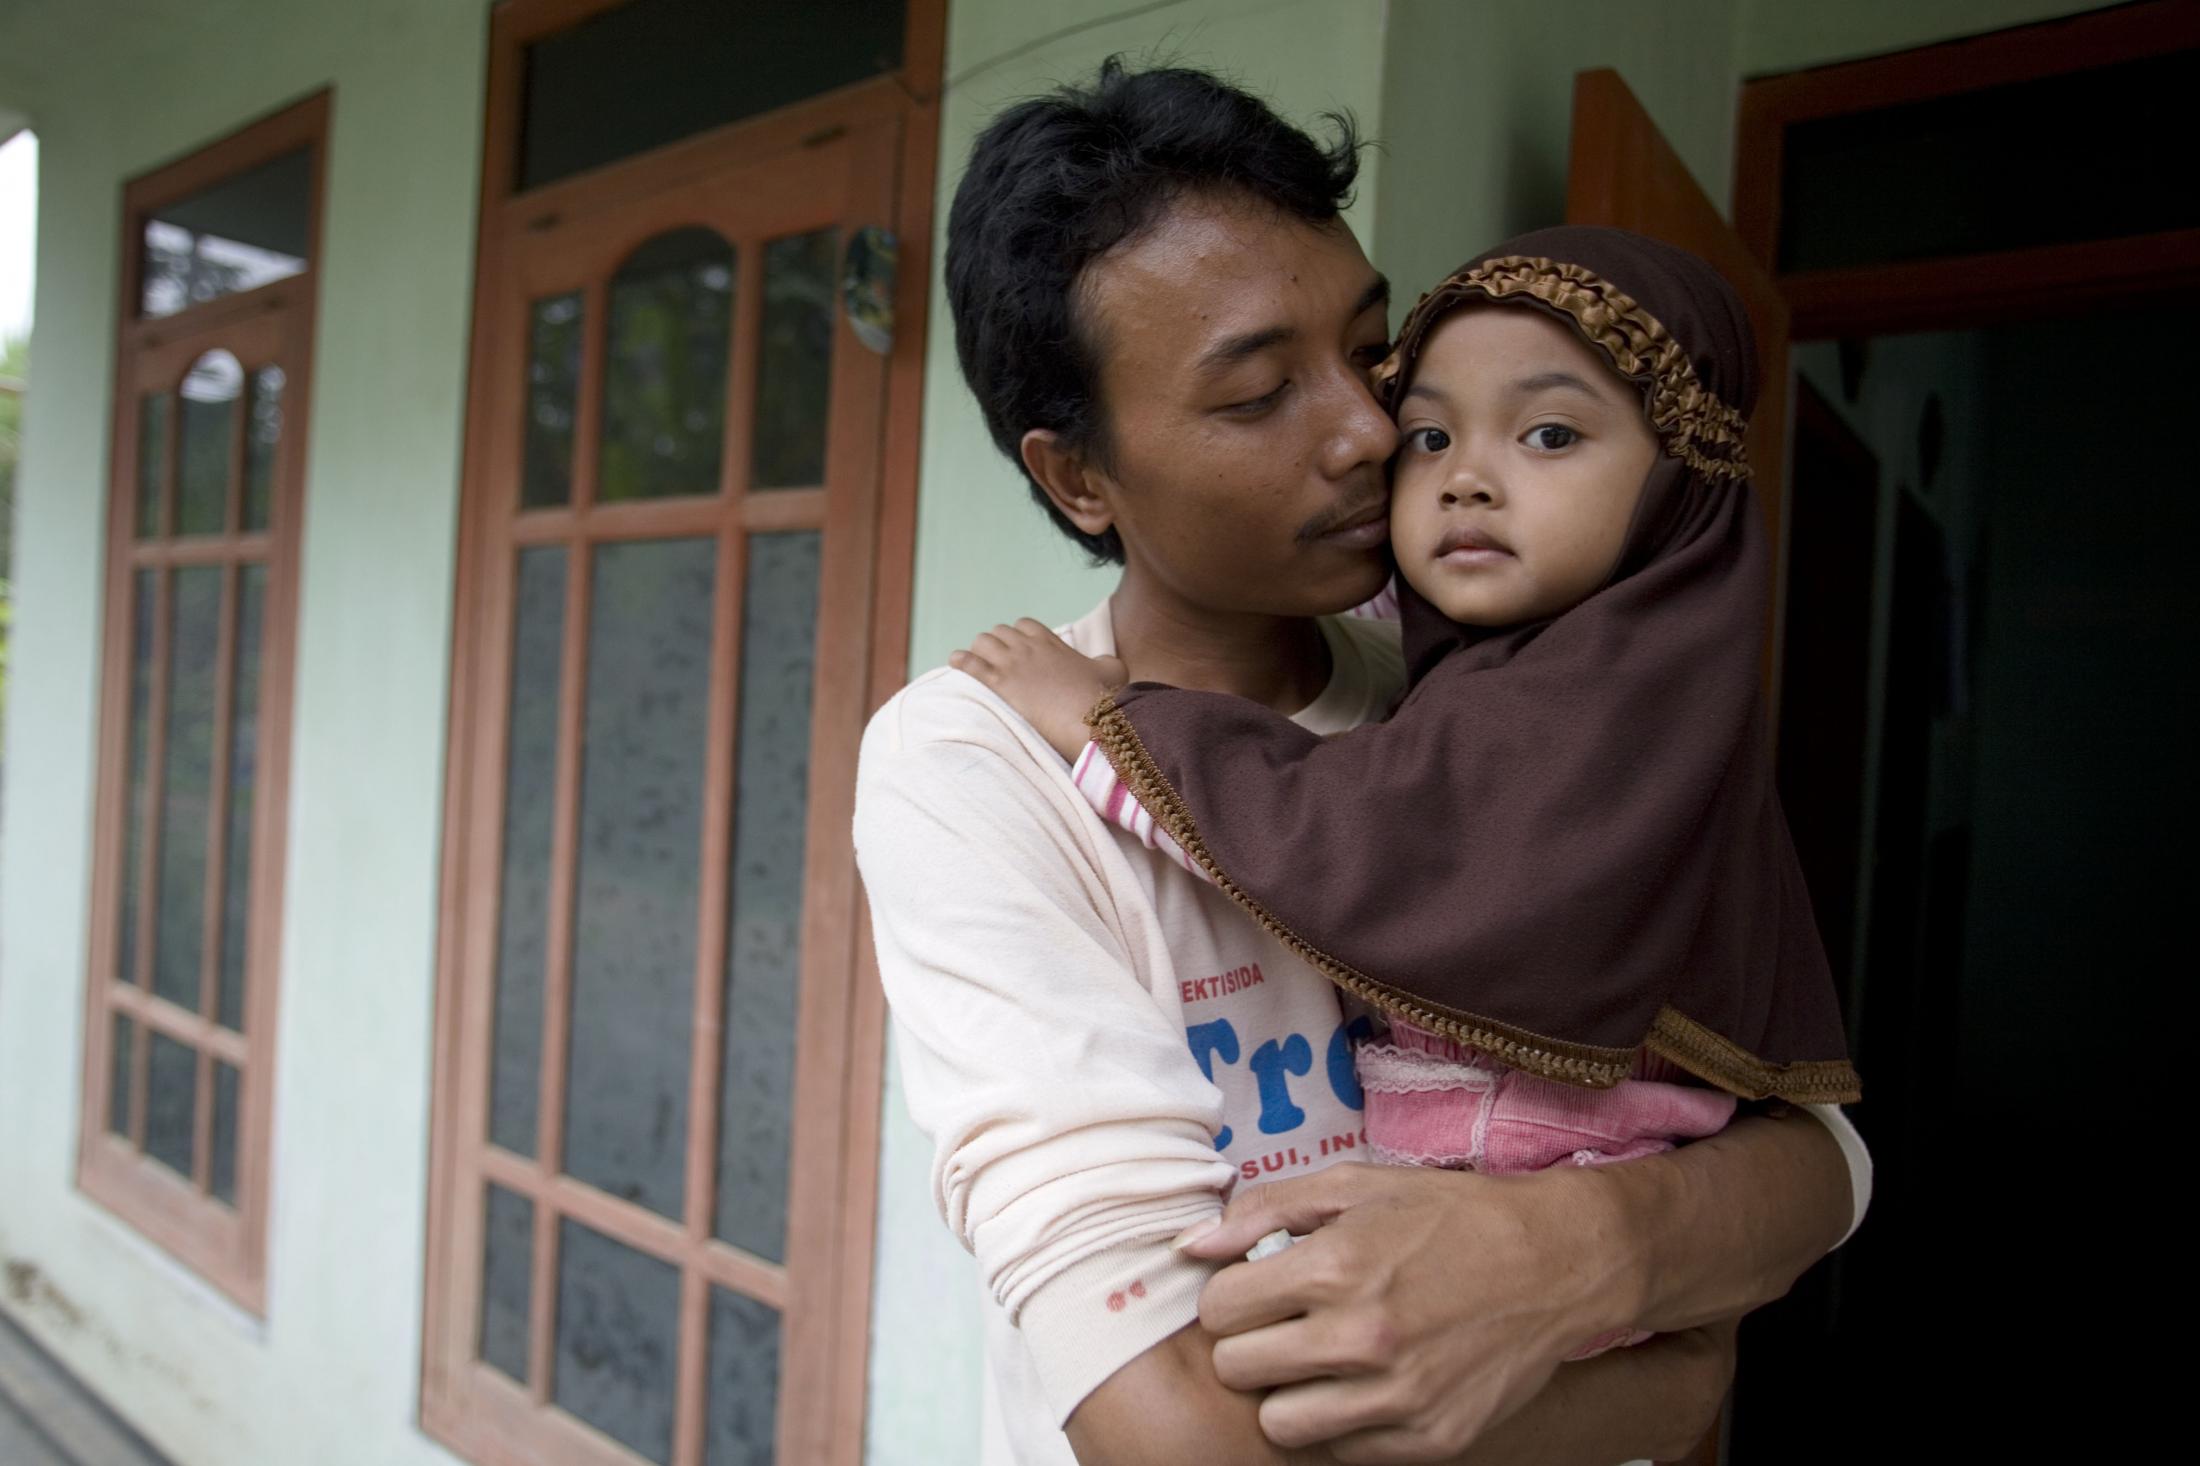 Suprianto, 27, is the primary caretaker for his 4 year old daughter Abigail. His wife,...